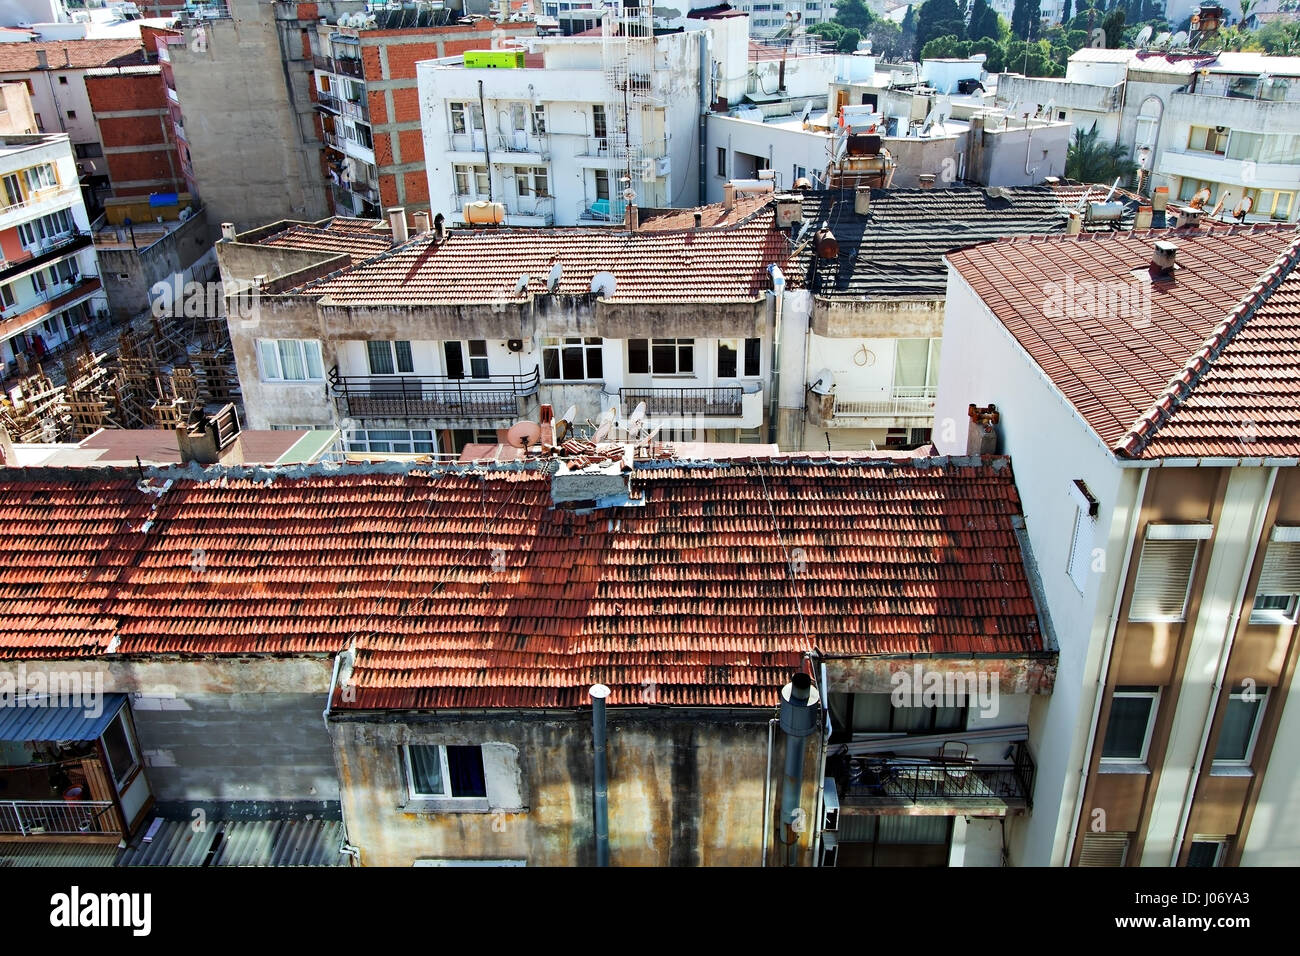 A view across the rooftops of Kusadasi Turkey Stock Photo